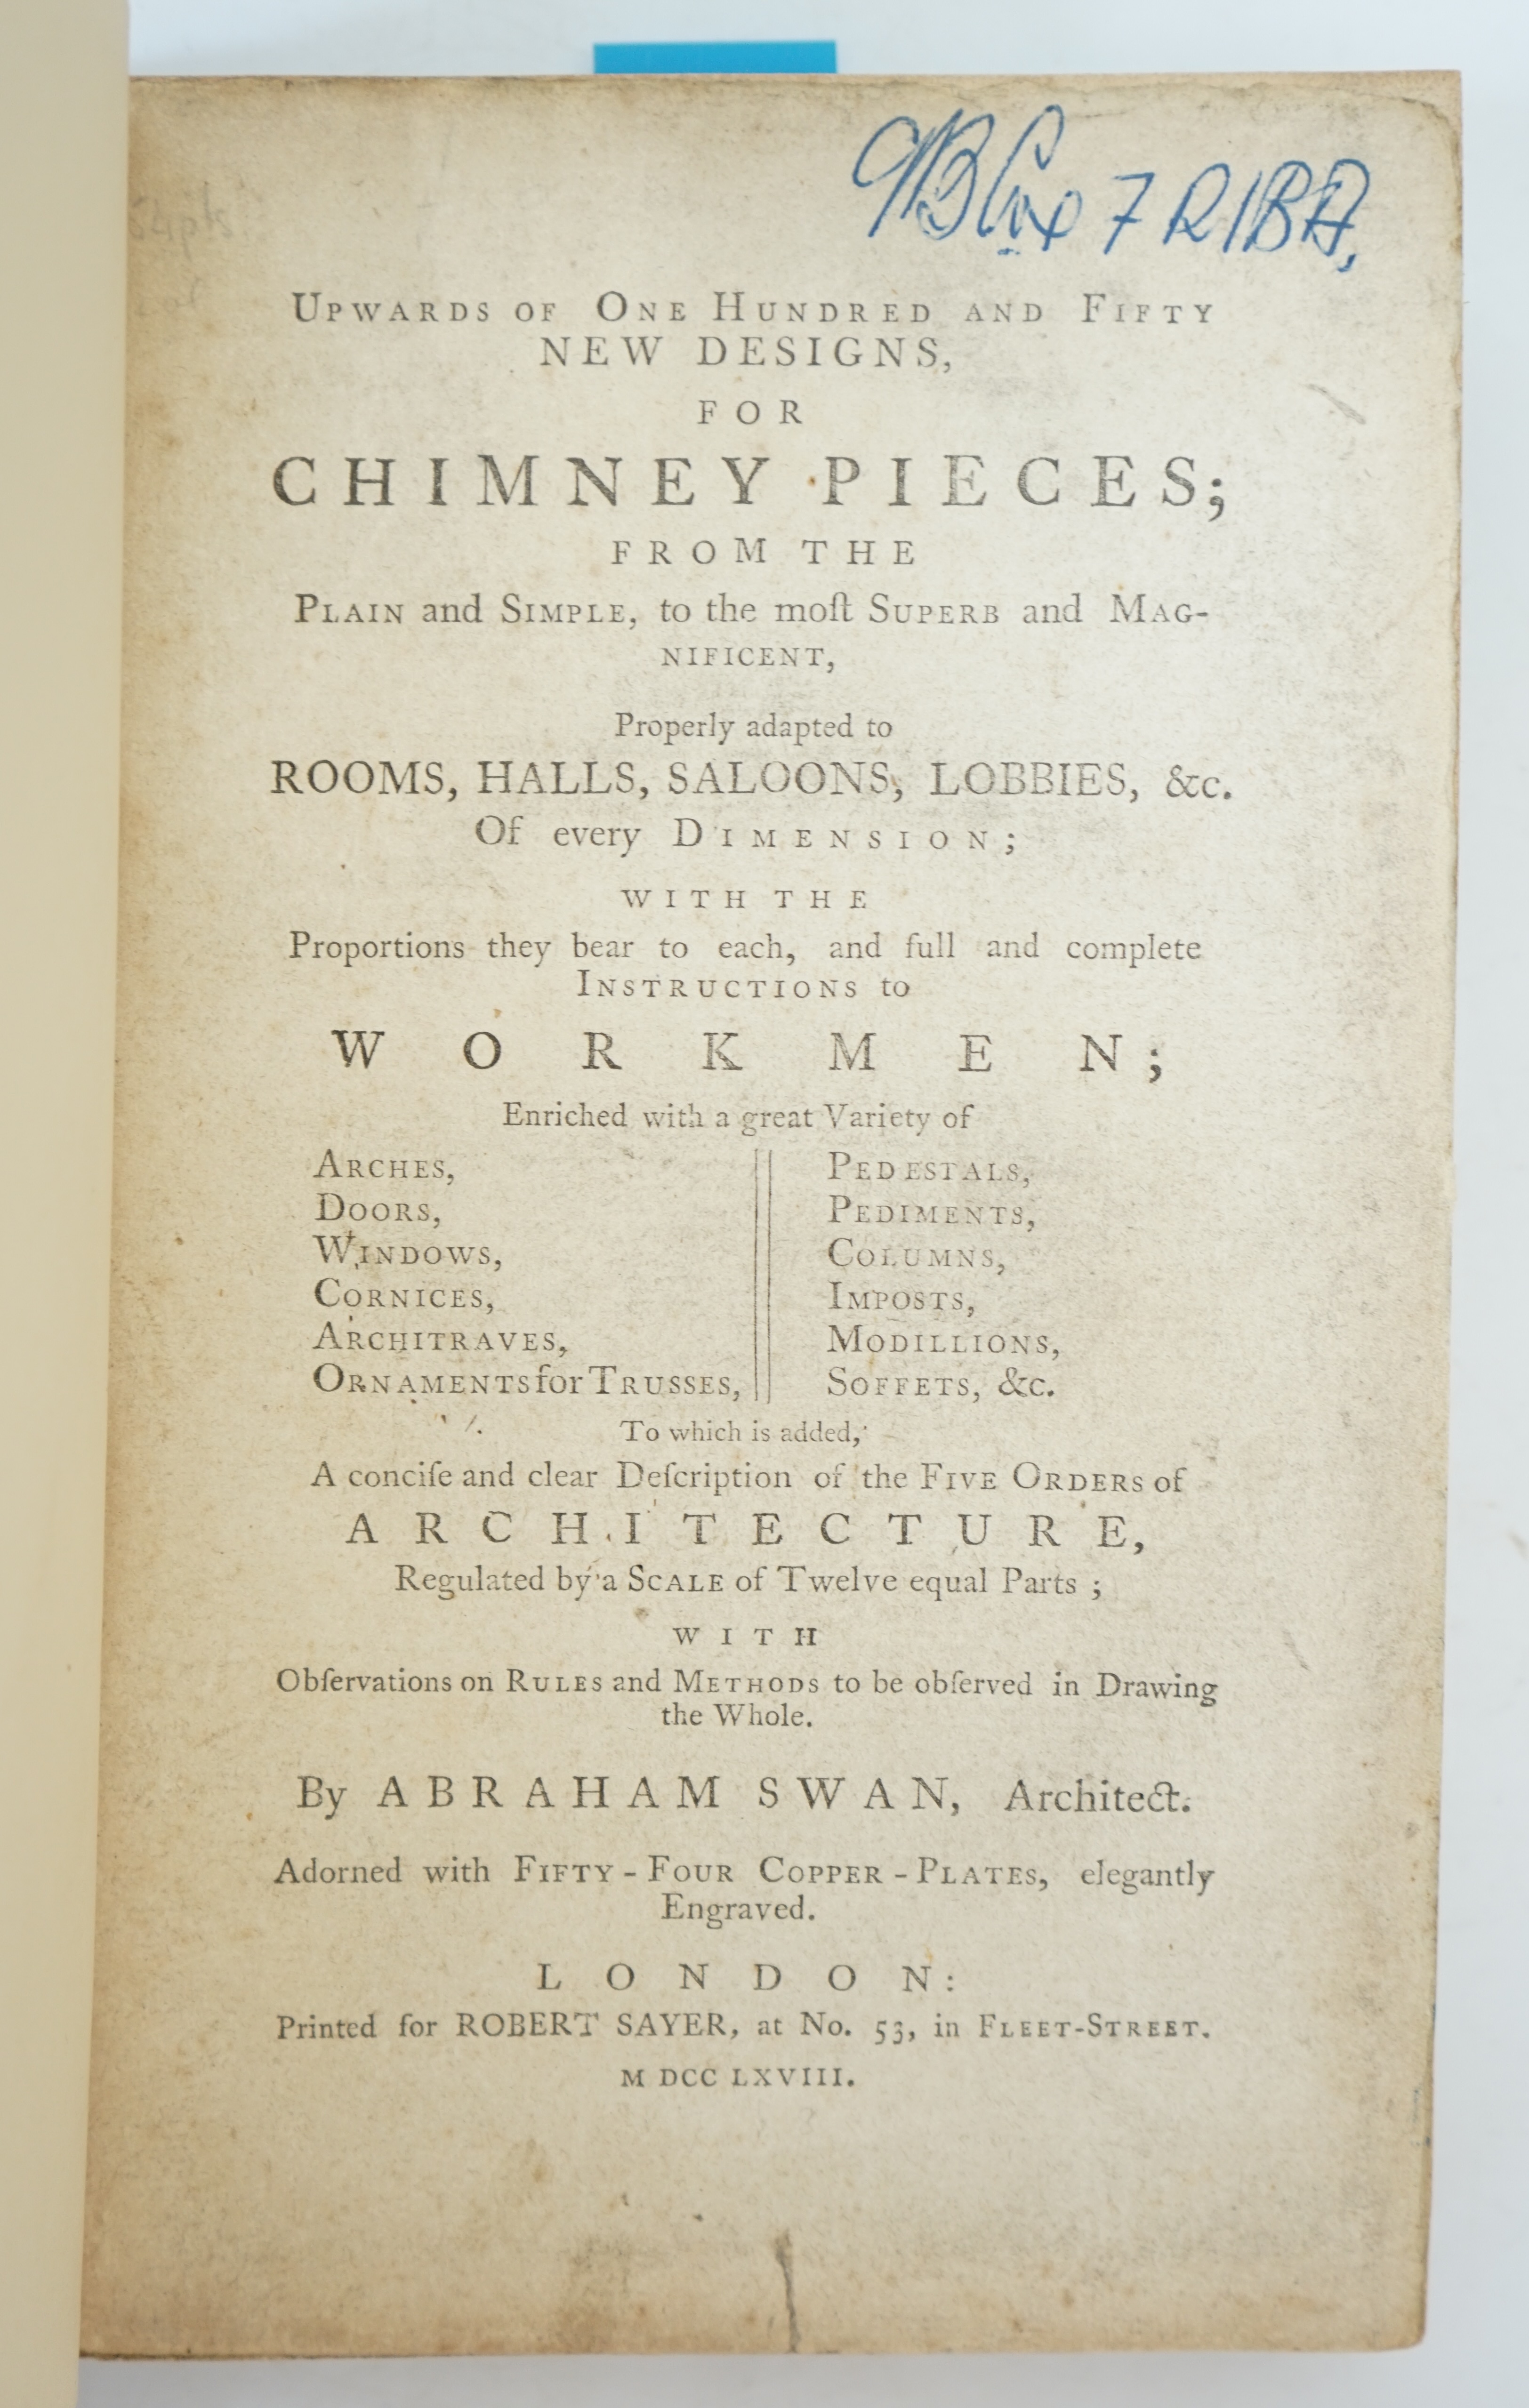 Swan, Abraham - Upwards of One Hundred and Fifty New Designs for Chimney Pieces; from the Plain and Simple, to the most Superb and Magnificent, 8vo, rebound olive green morocco, with 54 engraved plates on 53 sheets, (pla